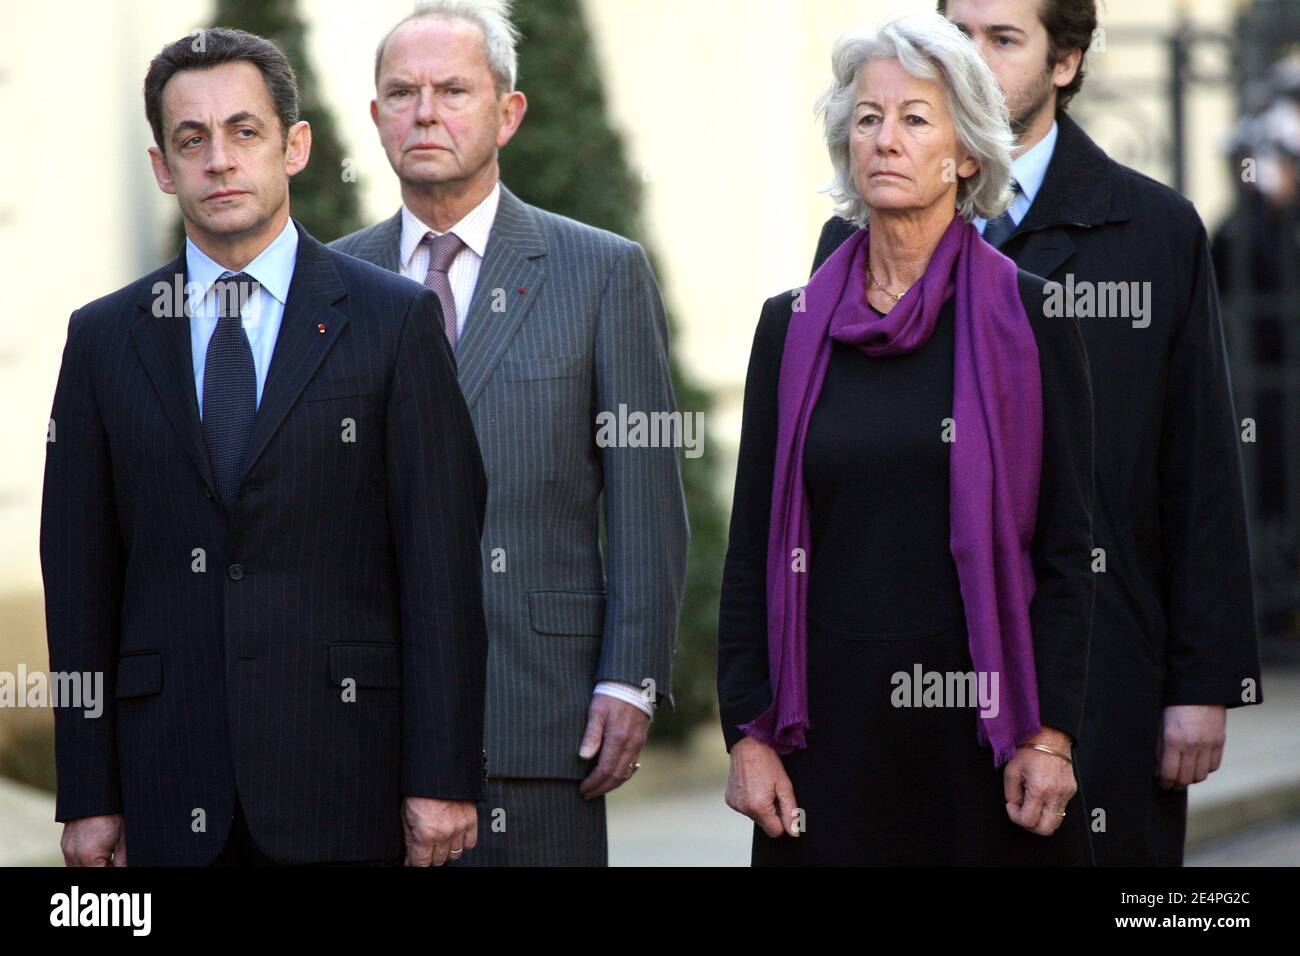 Nicolas Sarkozy, Dominique Erignac (Claude Eriganc's widow) and her son Charles-Antoine, during a ceremony Place Beauvau, in memory of Prefect Claude Erignac, who was killed in Corsica in 1998. Paris, France, on February 6, 2008. Photo by Mousse-Taamallah/ABACAPRESS.COM Stock Photo